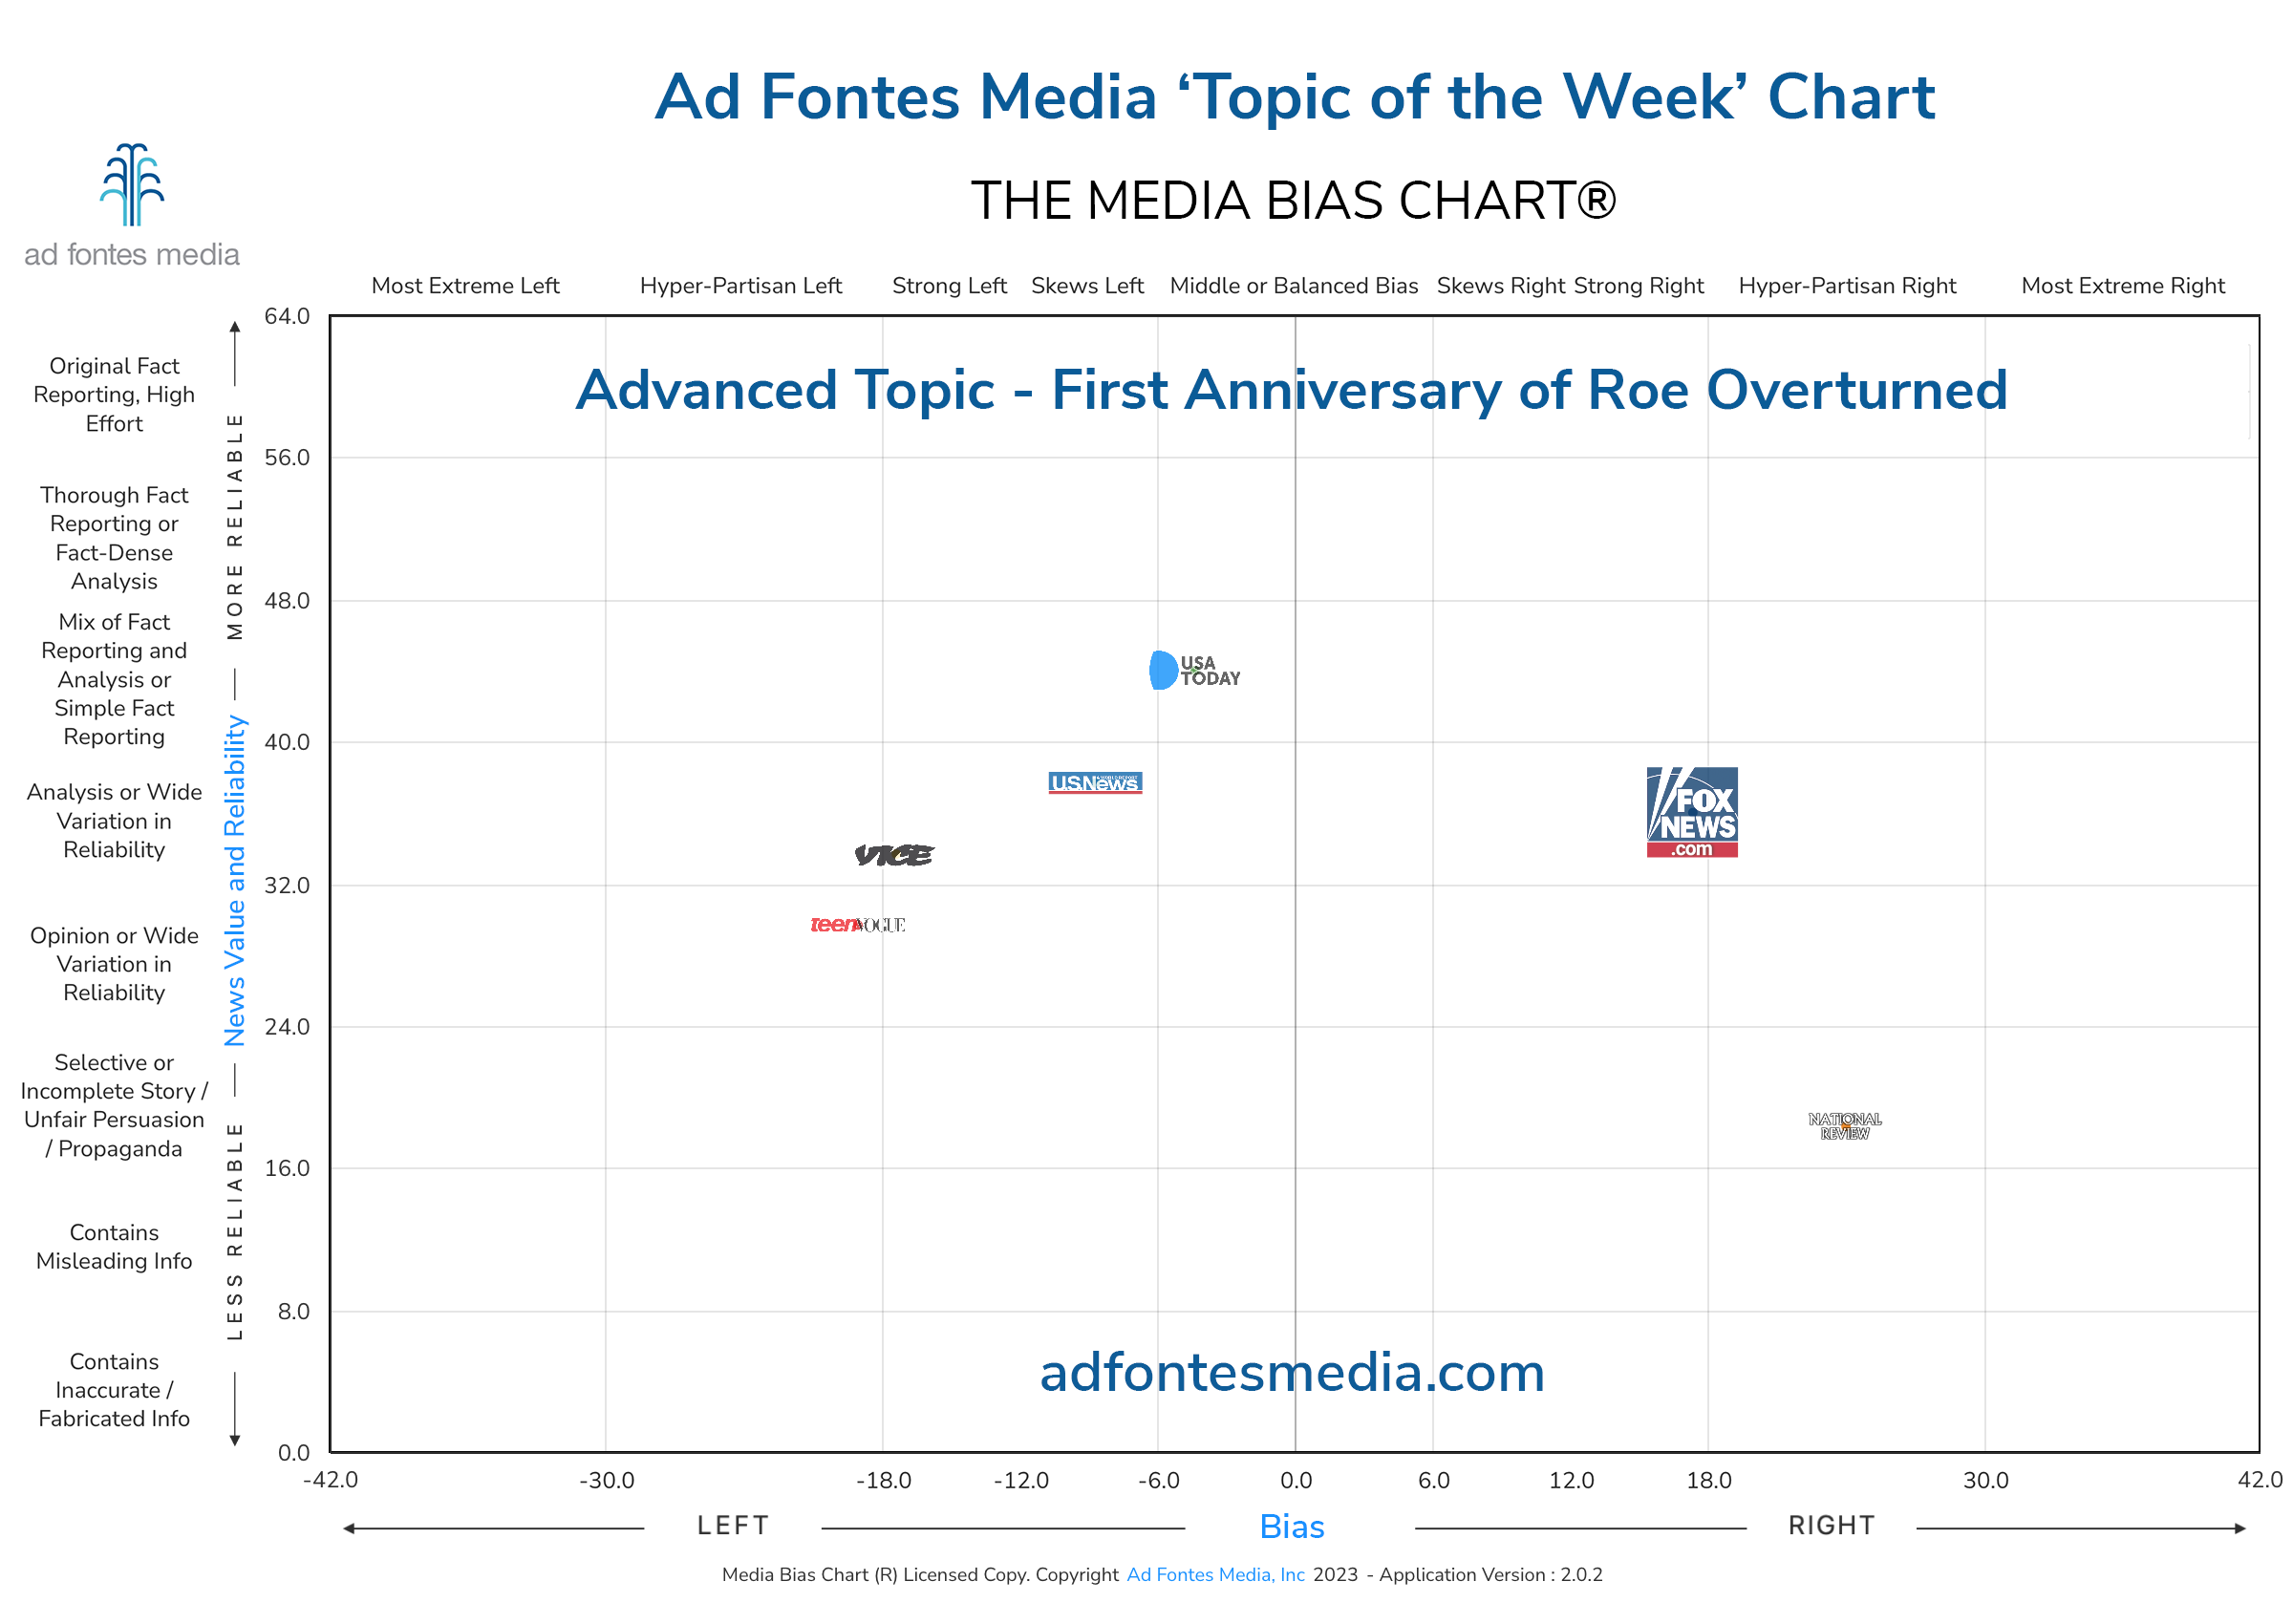 Scores of the First Anniversary of Roe Overturned articles on the chart